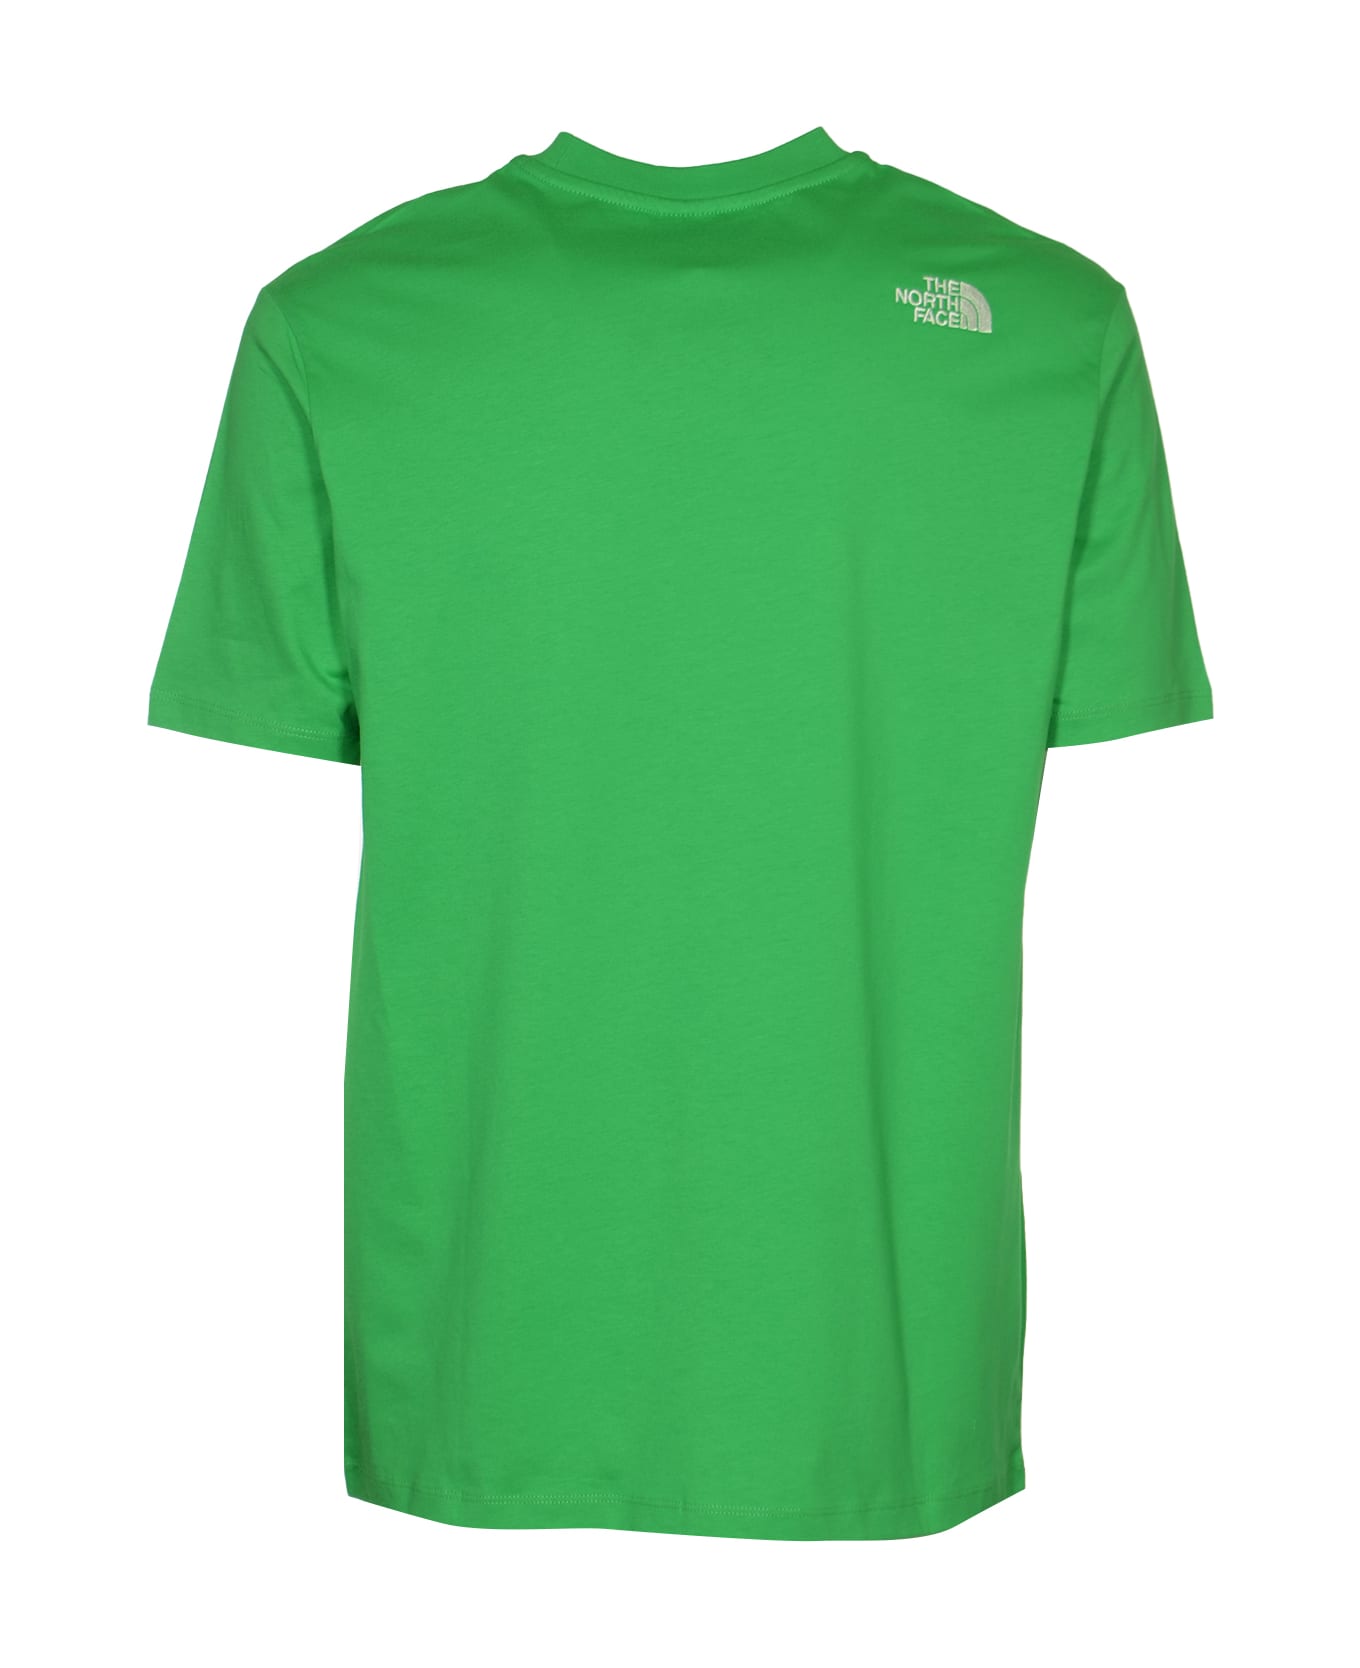 The North Face Essential Oversize T-shirt - Optic Emerald